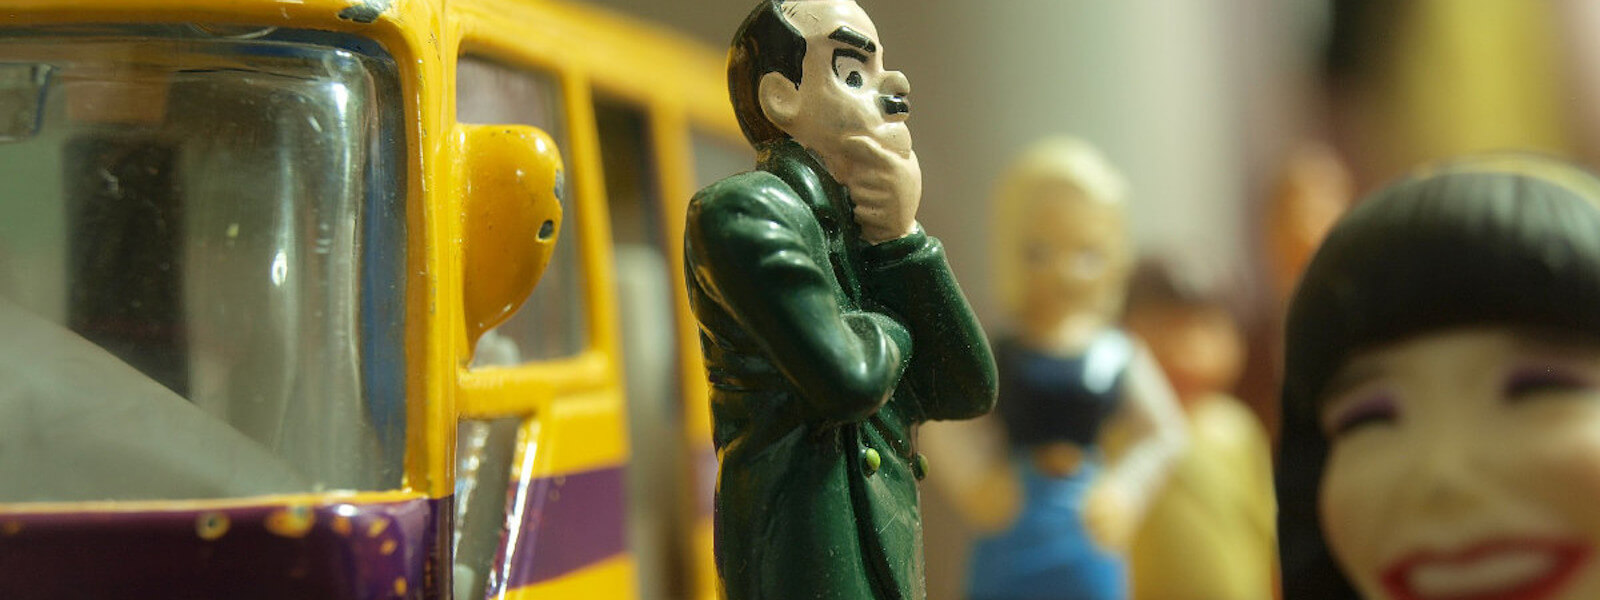 A tiny figurine of a man standing in front of a yellow bus, apparently worrying about something.